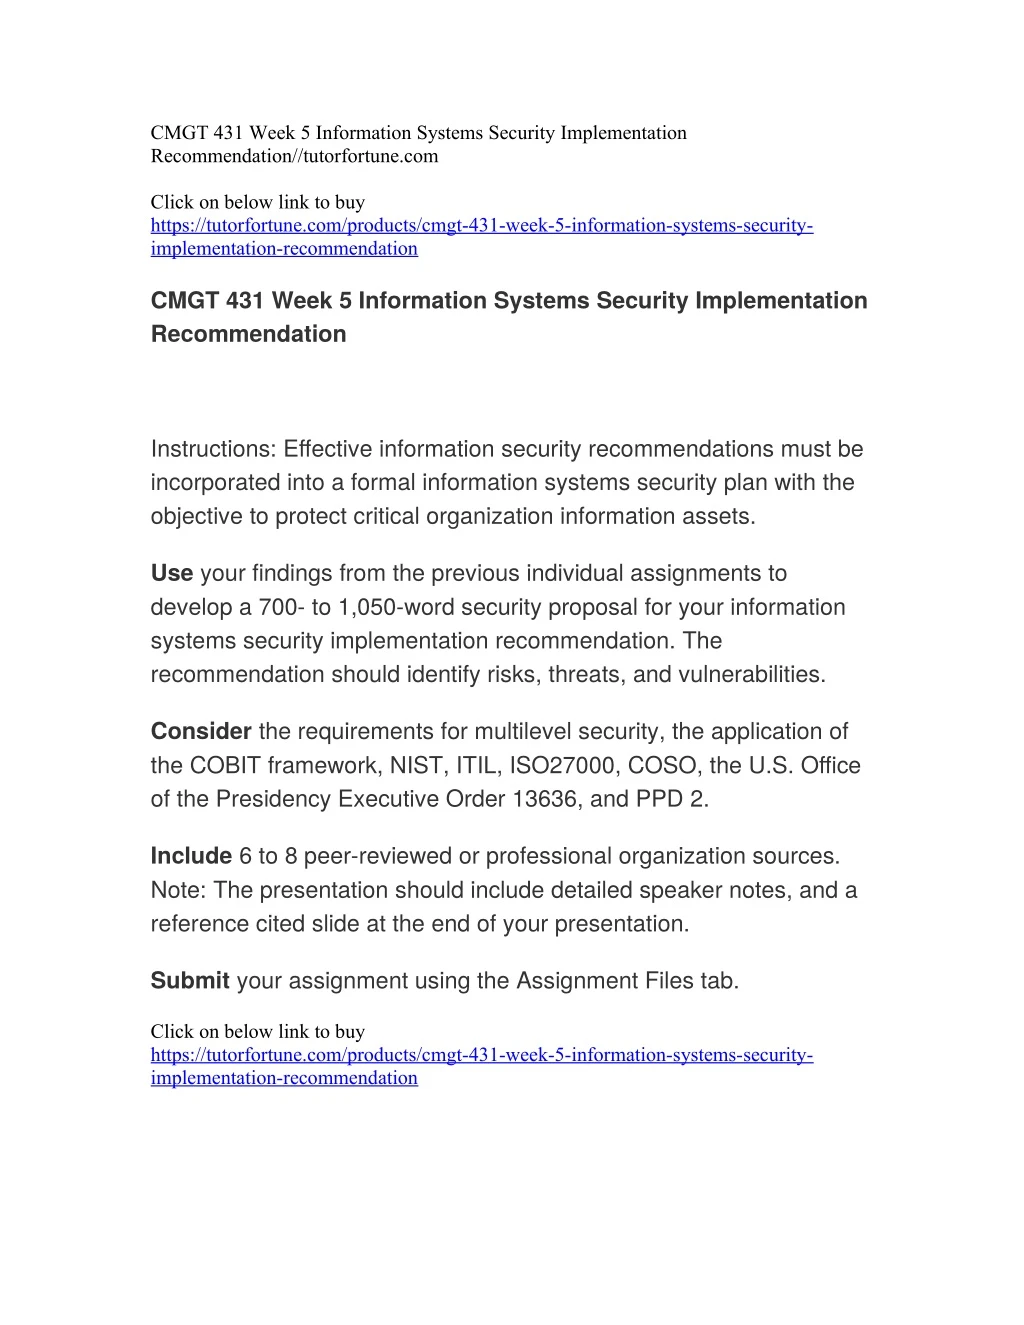 cmgt 431 week 5 information systems security